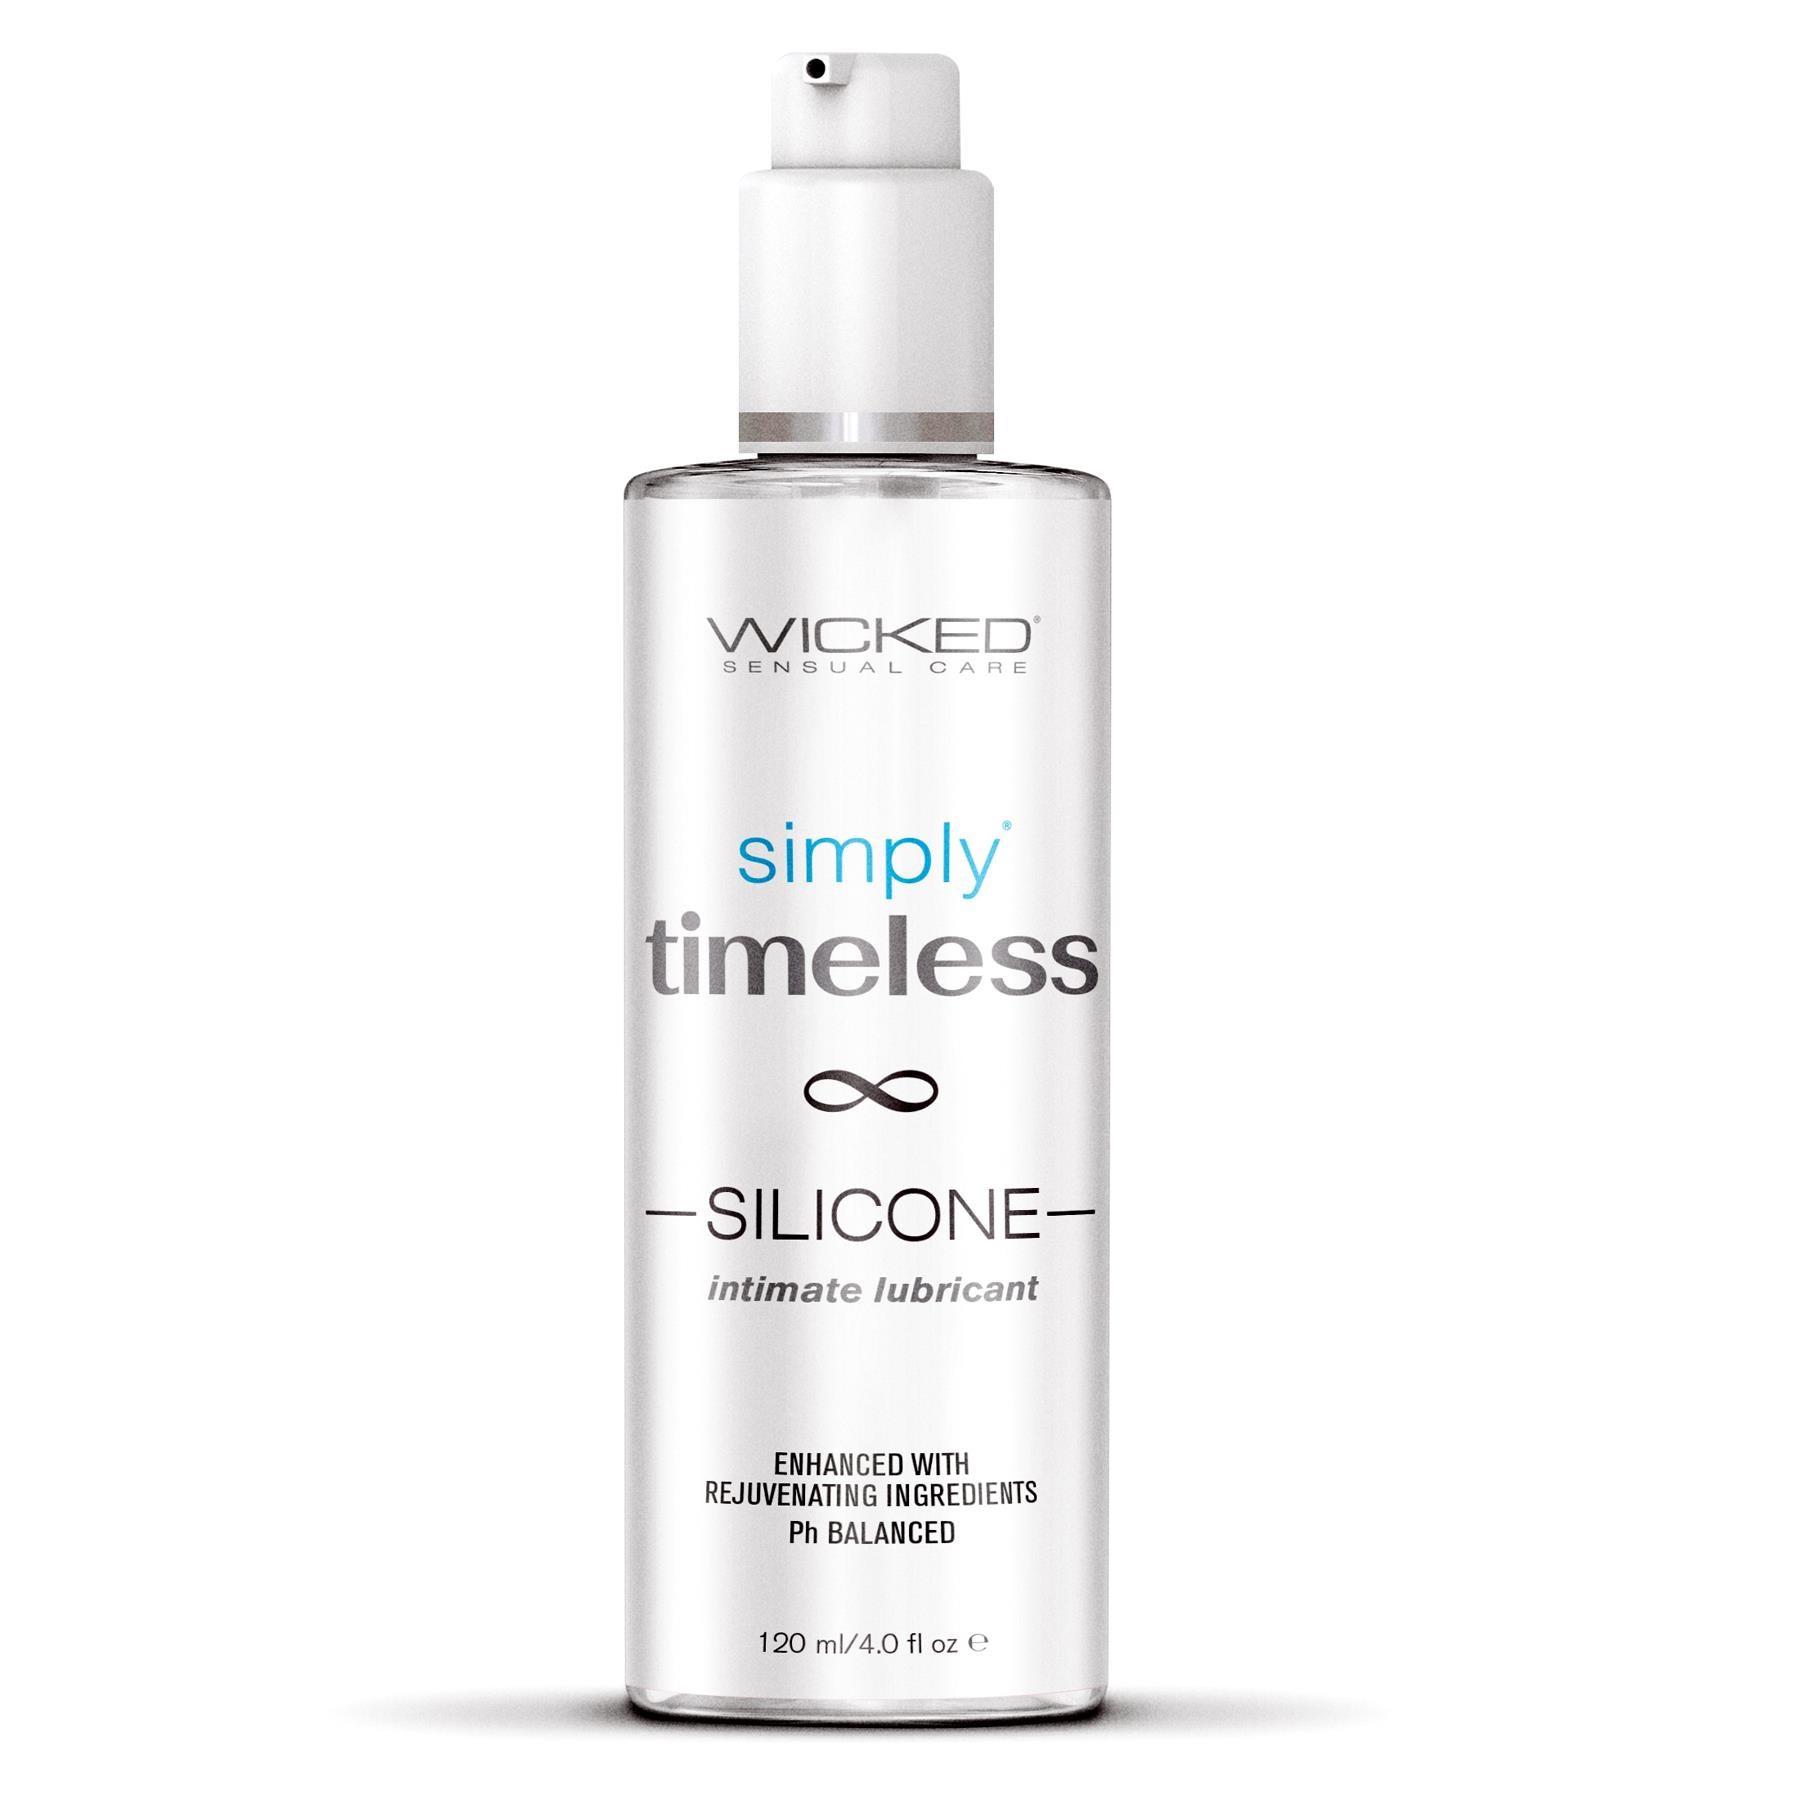 SIMPLY® TIMELESS SILICONE front of bottle